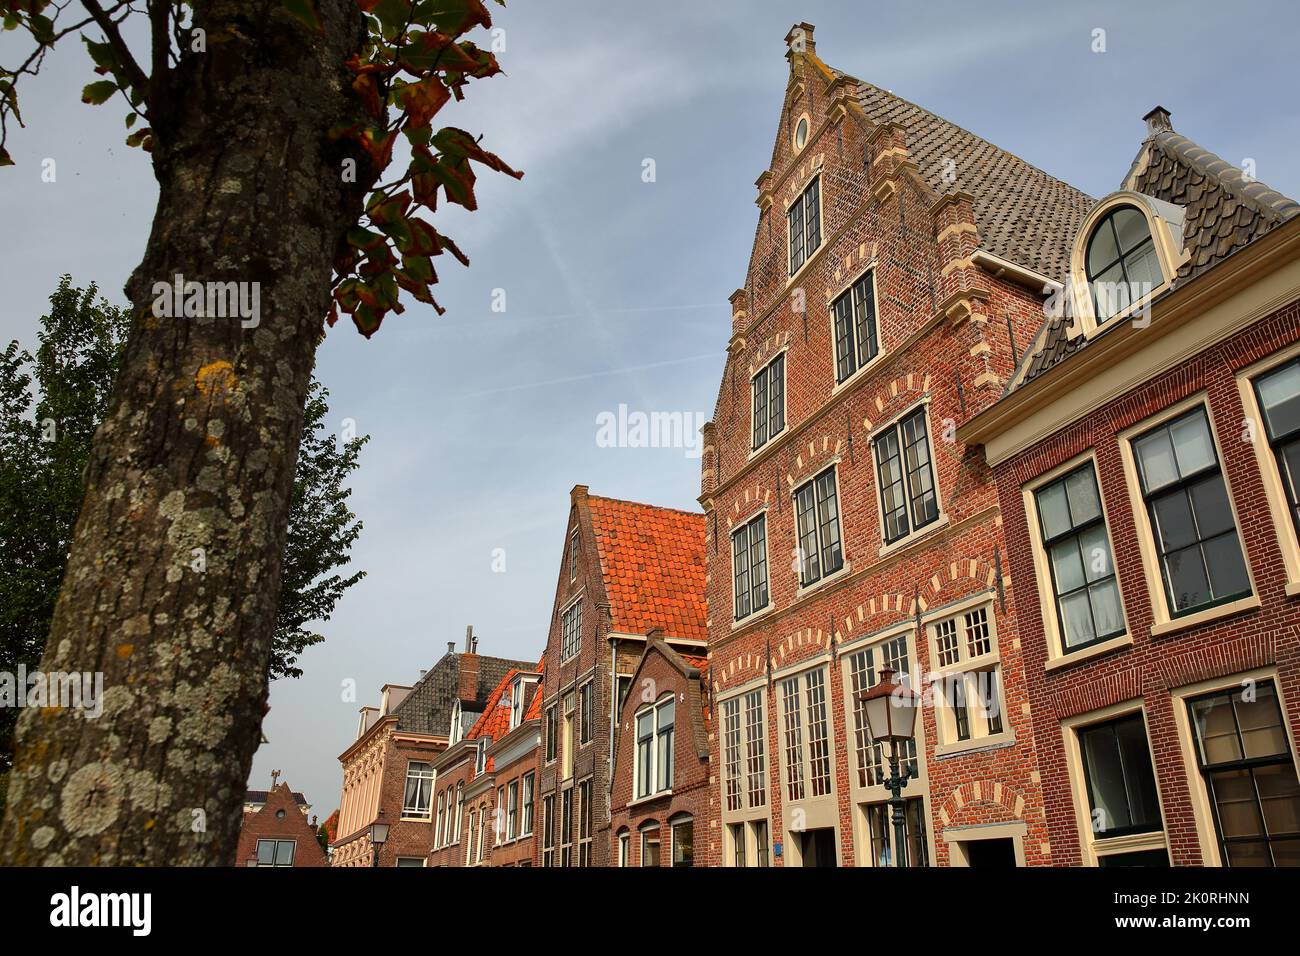 The colorful facades of historic houses located along Korenmarkt street near the harbor (Binnenhaven) of Hoorn, West Friesland, Netherlands Stock Photo